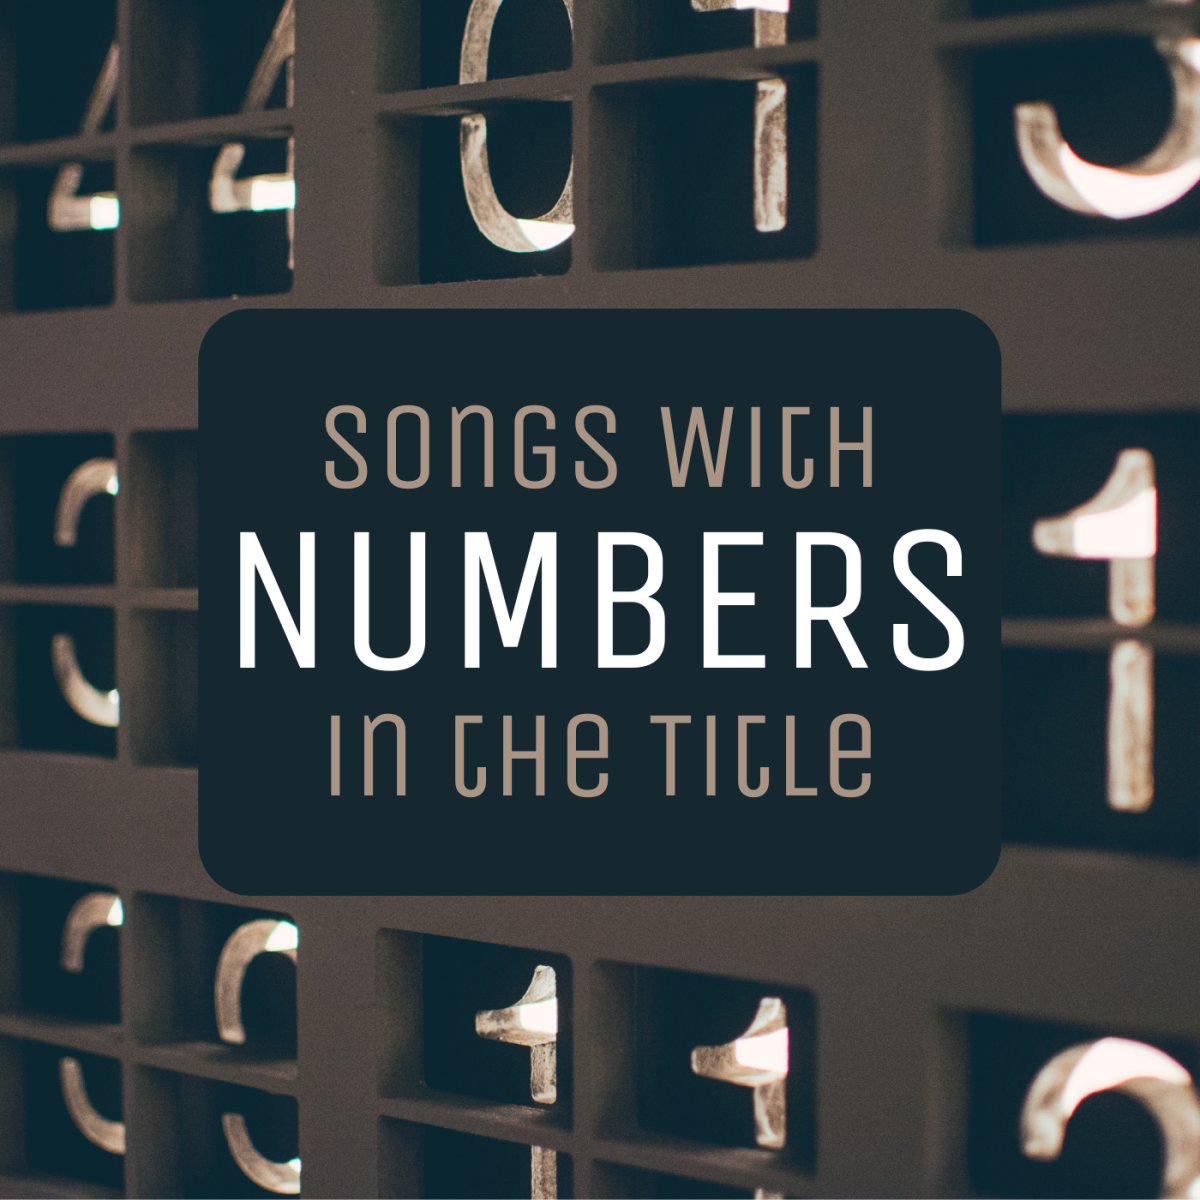 "Love Me Two Times," "Johnny 99," or "867-5309"? Find a bunch of rock songs with numbers in their titles and lyrics.